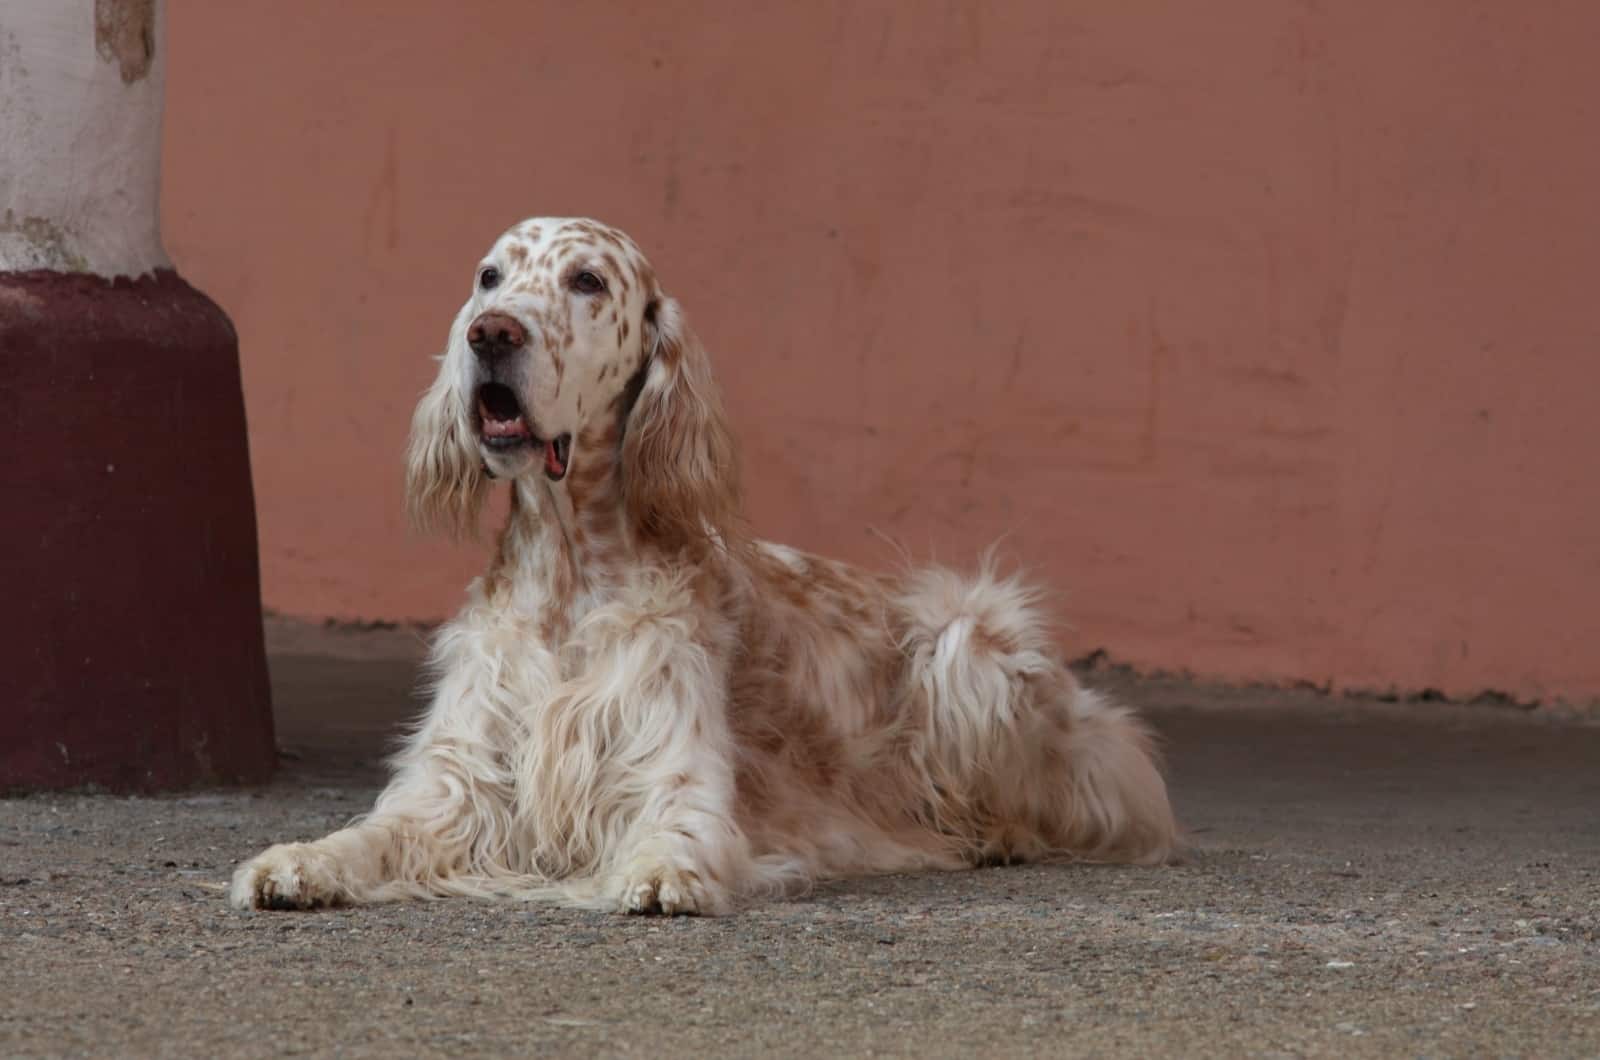 English Setter sitting and posing for photo